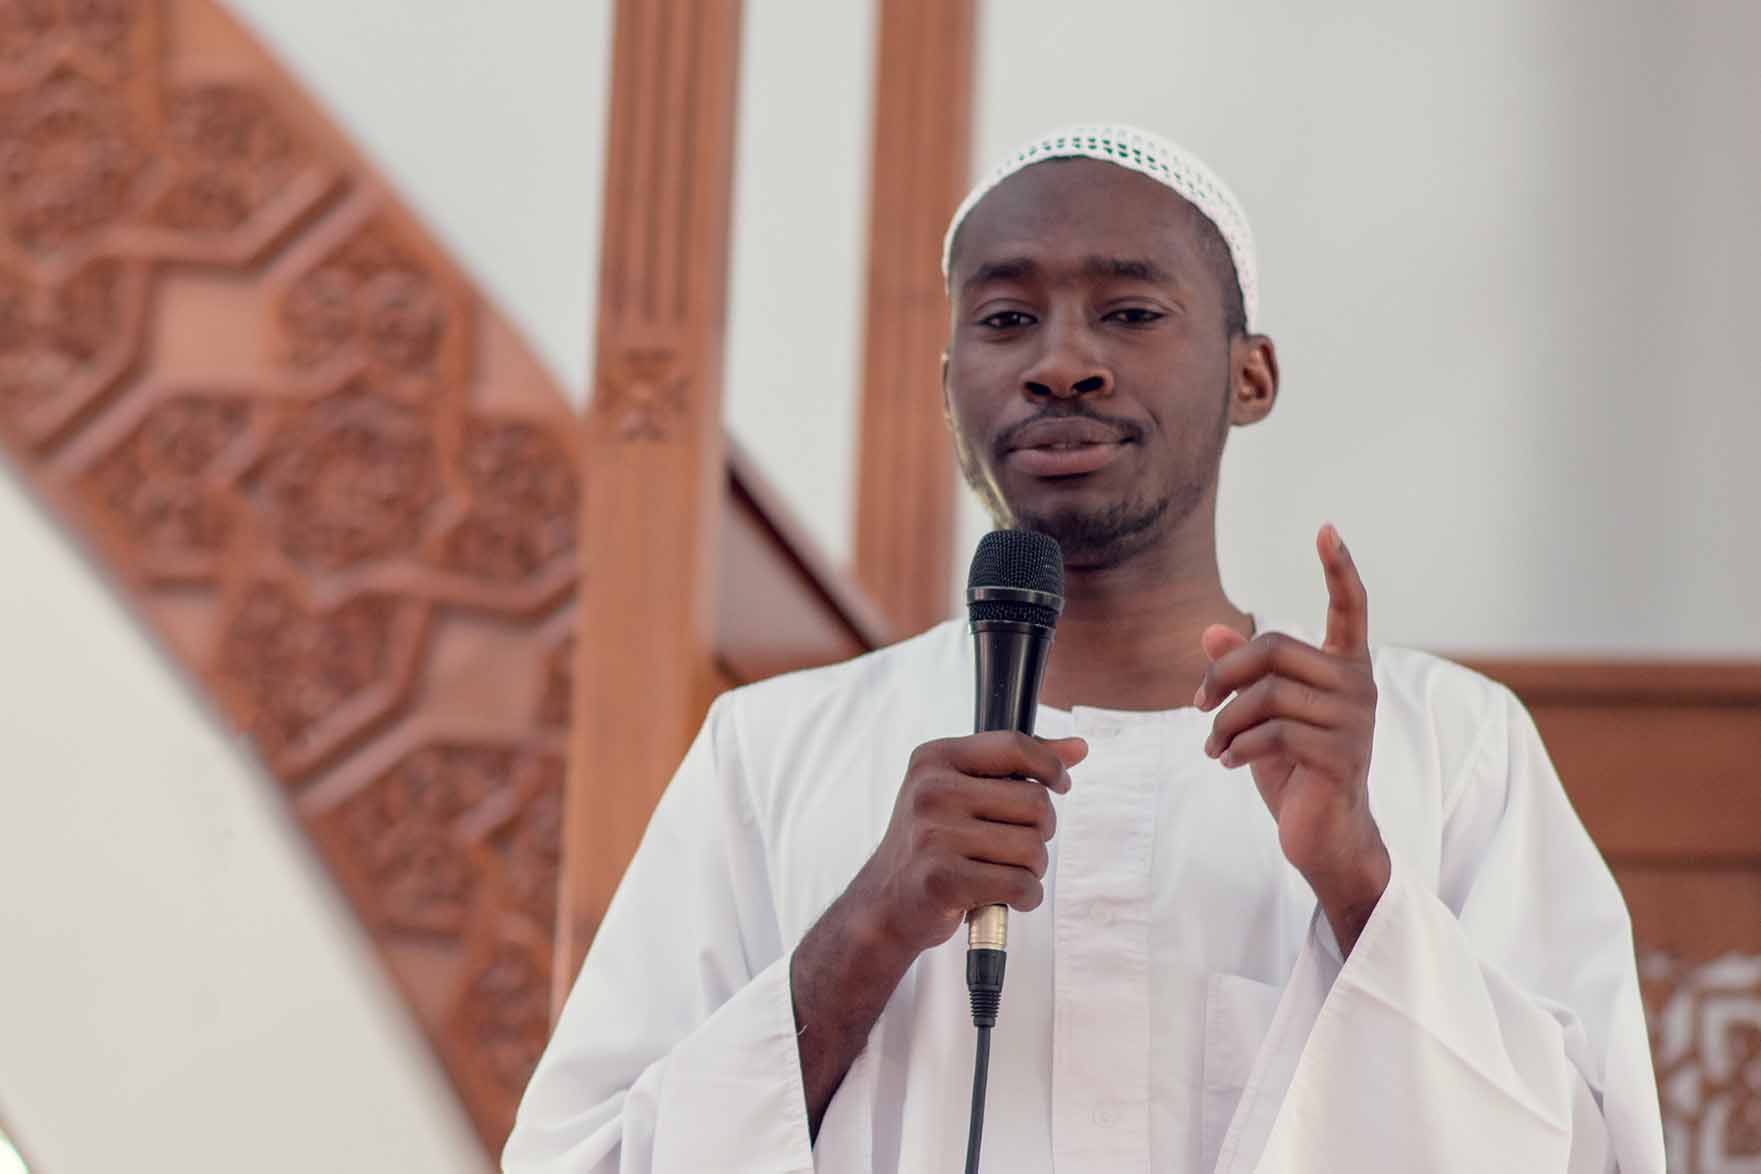 An imam holding a microphone speaking to his congregation